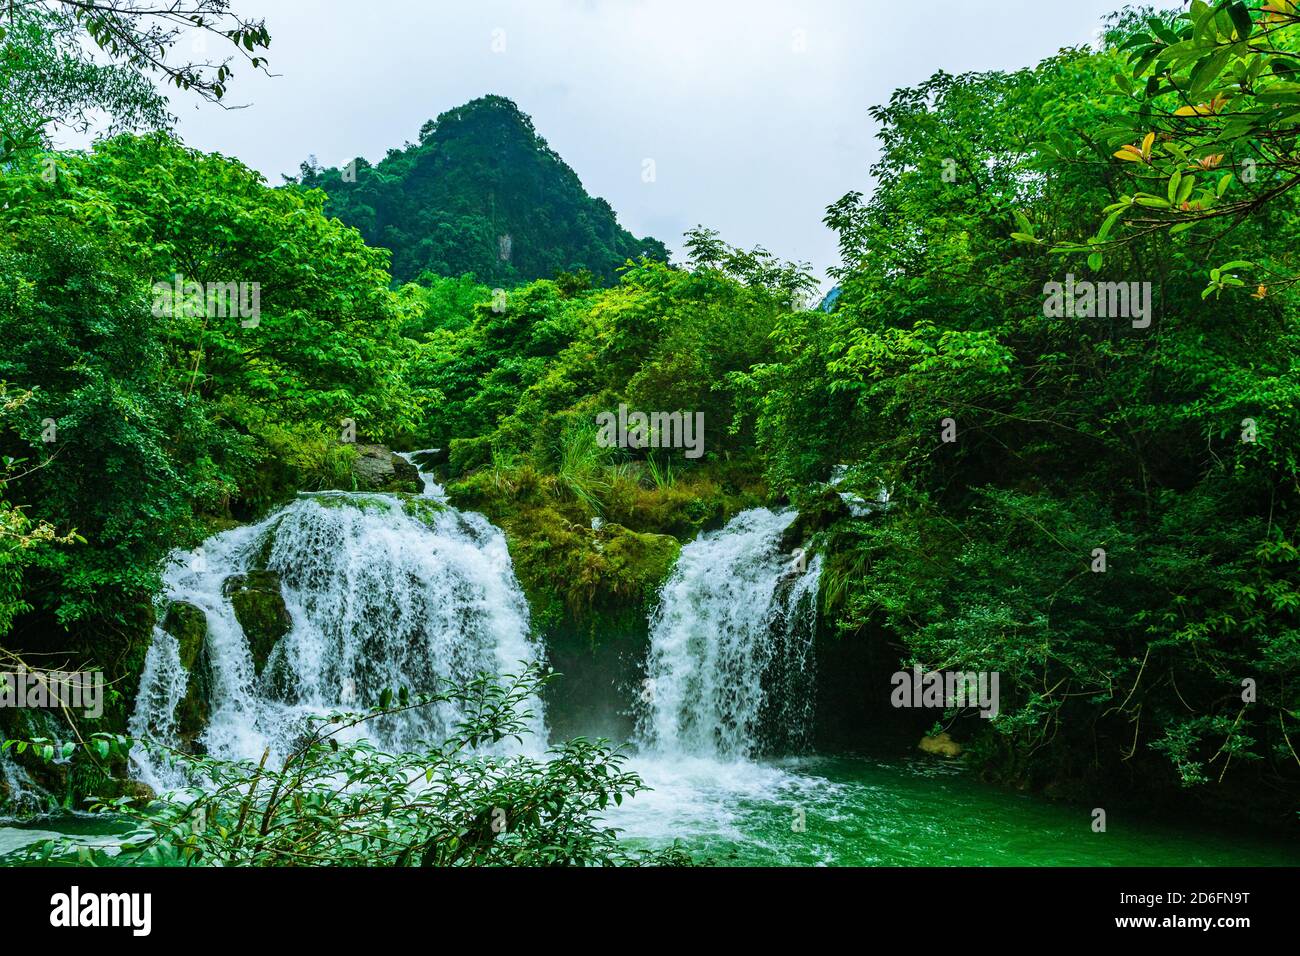 Waterfall scenery in spring Stock Photo